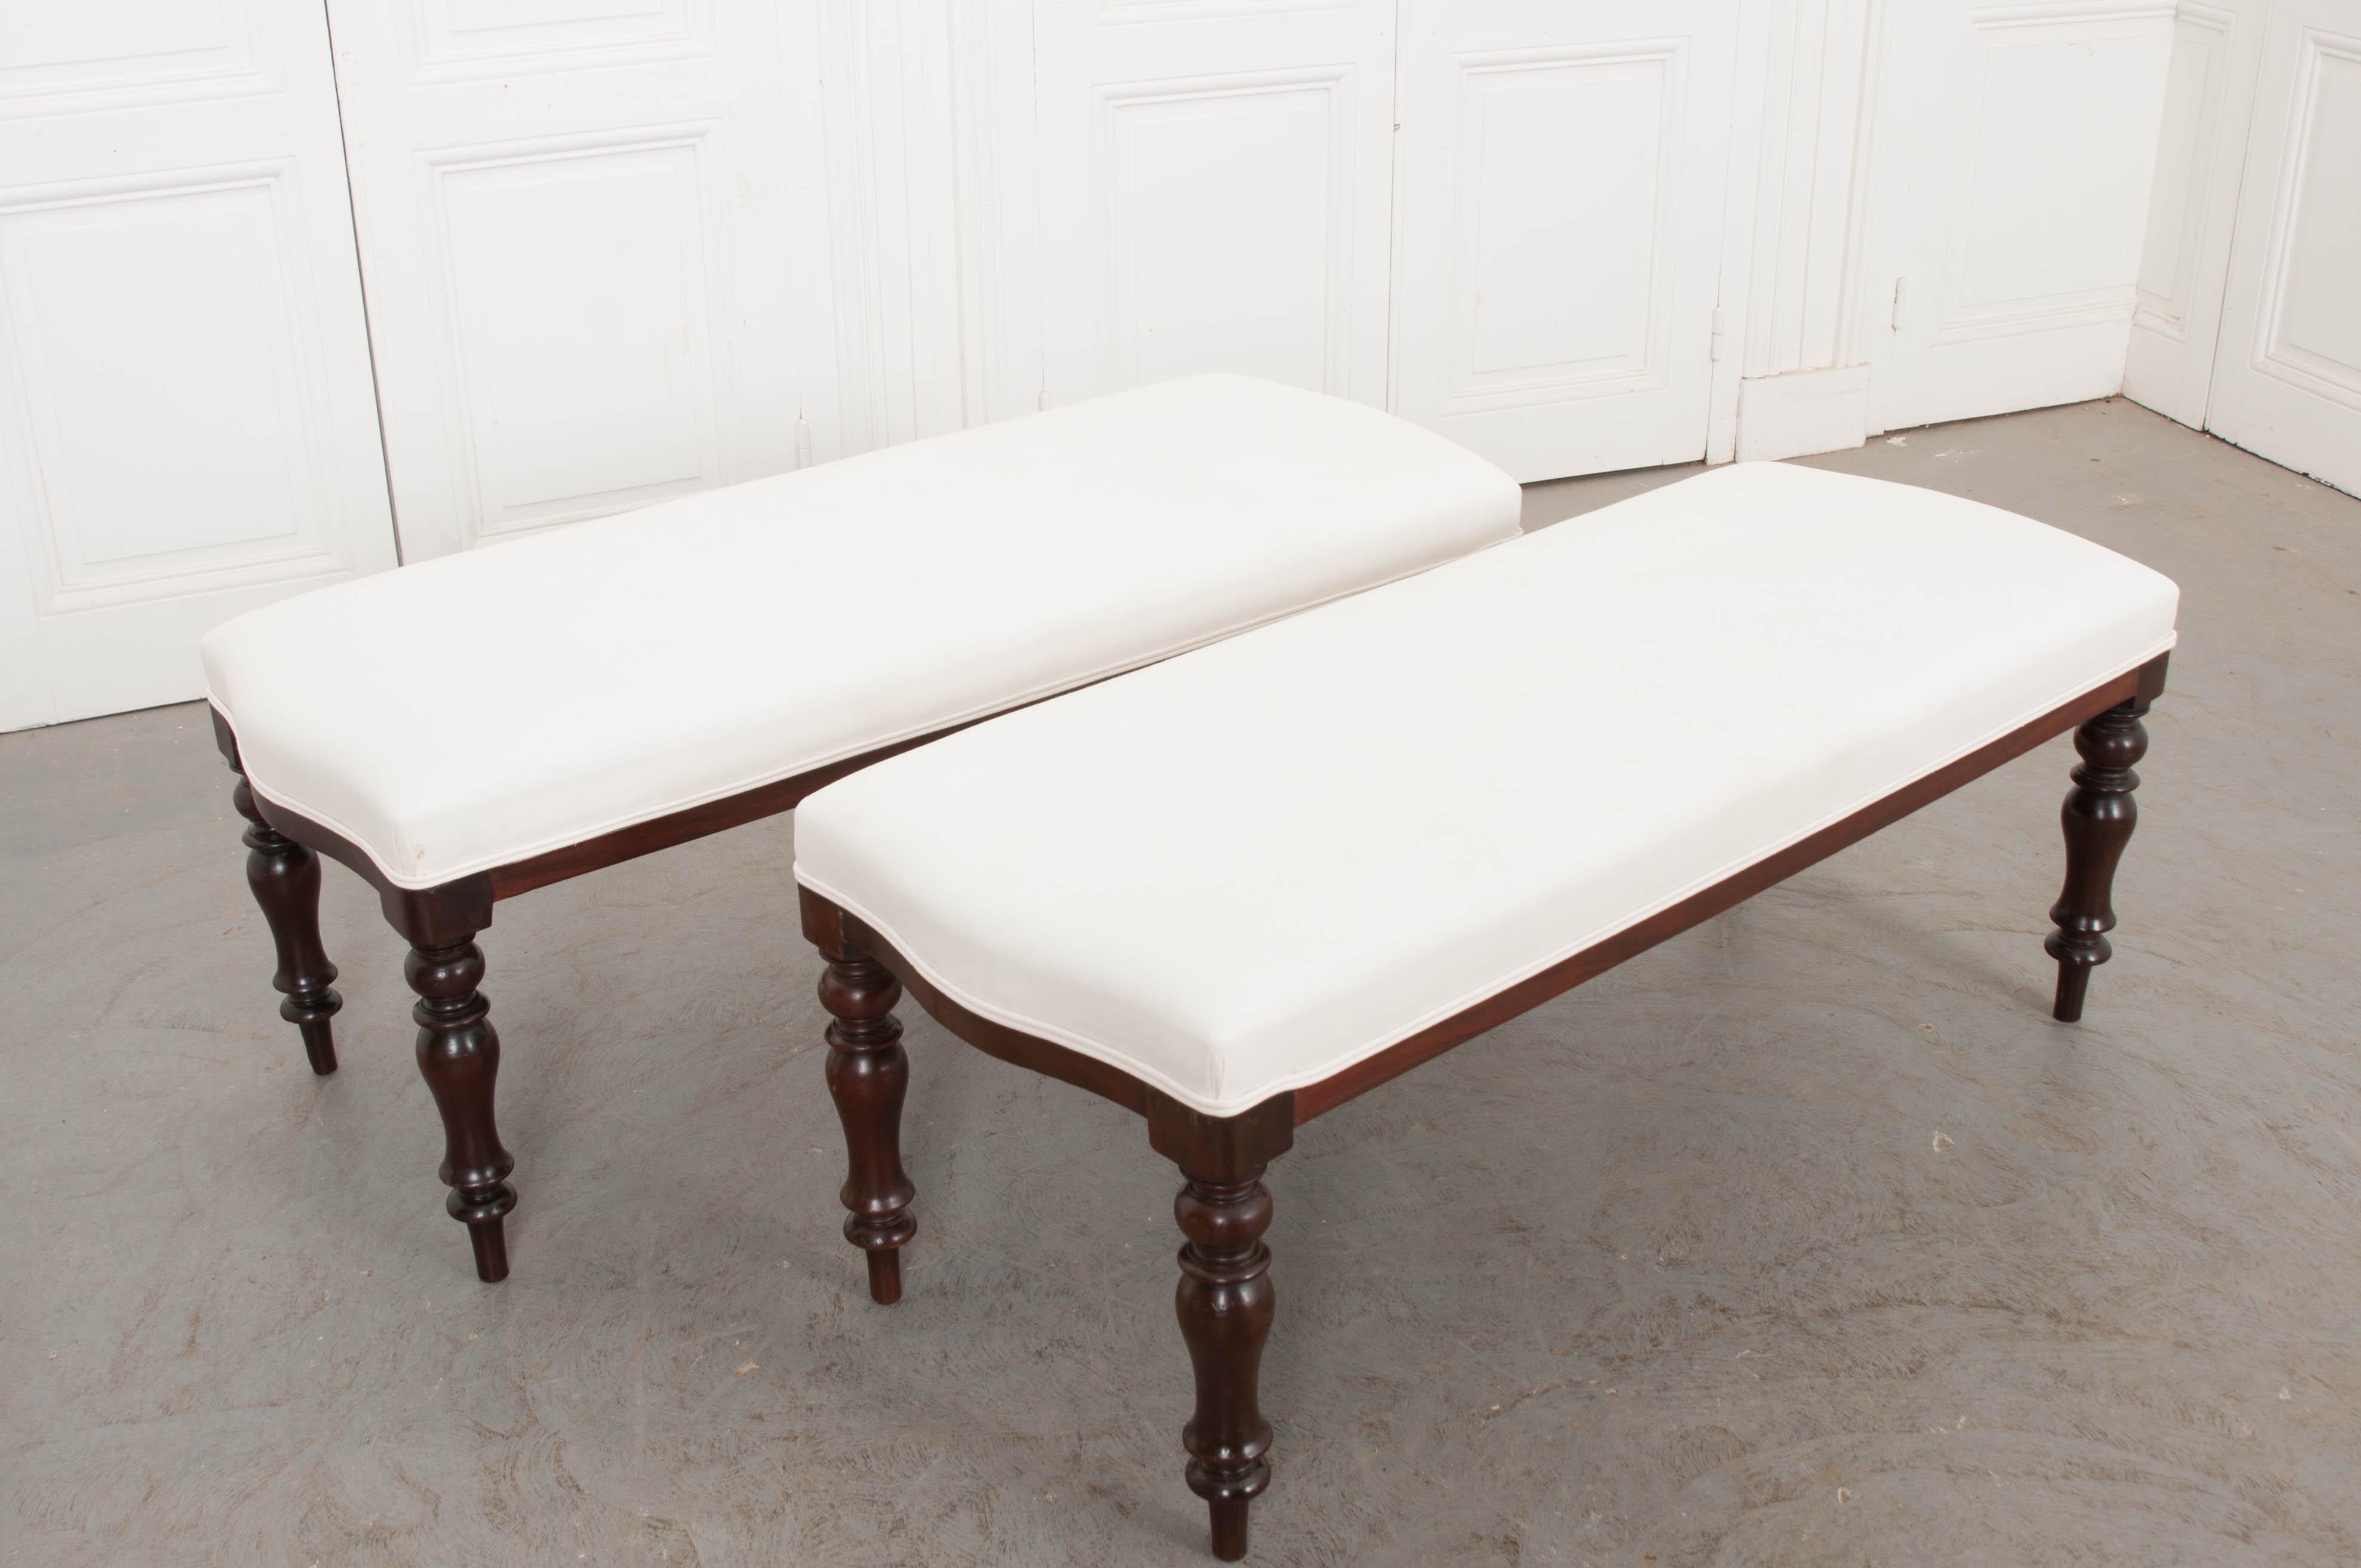 This fantastic pair of George III mahogany benches, circa 1820, is from England and features serpentine sides and finely turned legs. Newly upholstered in a white muslin with double-welt cording. Available individually for $1450.00.